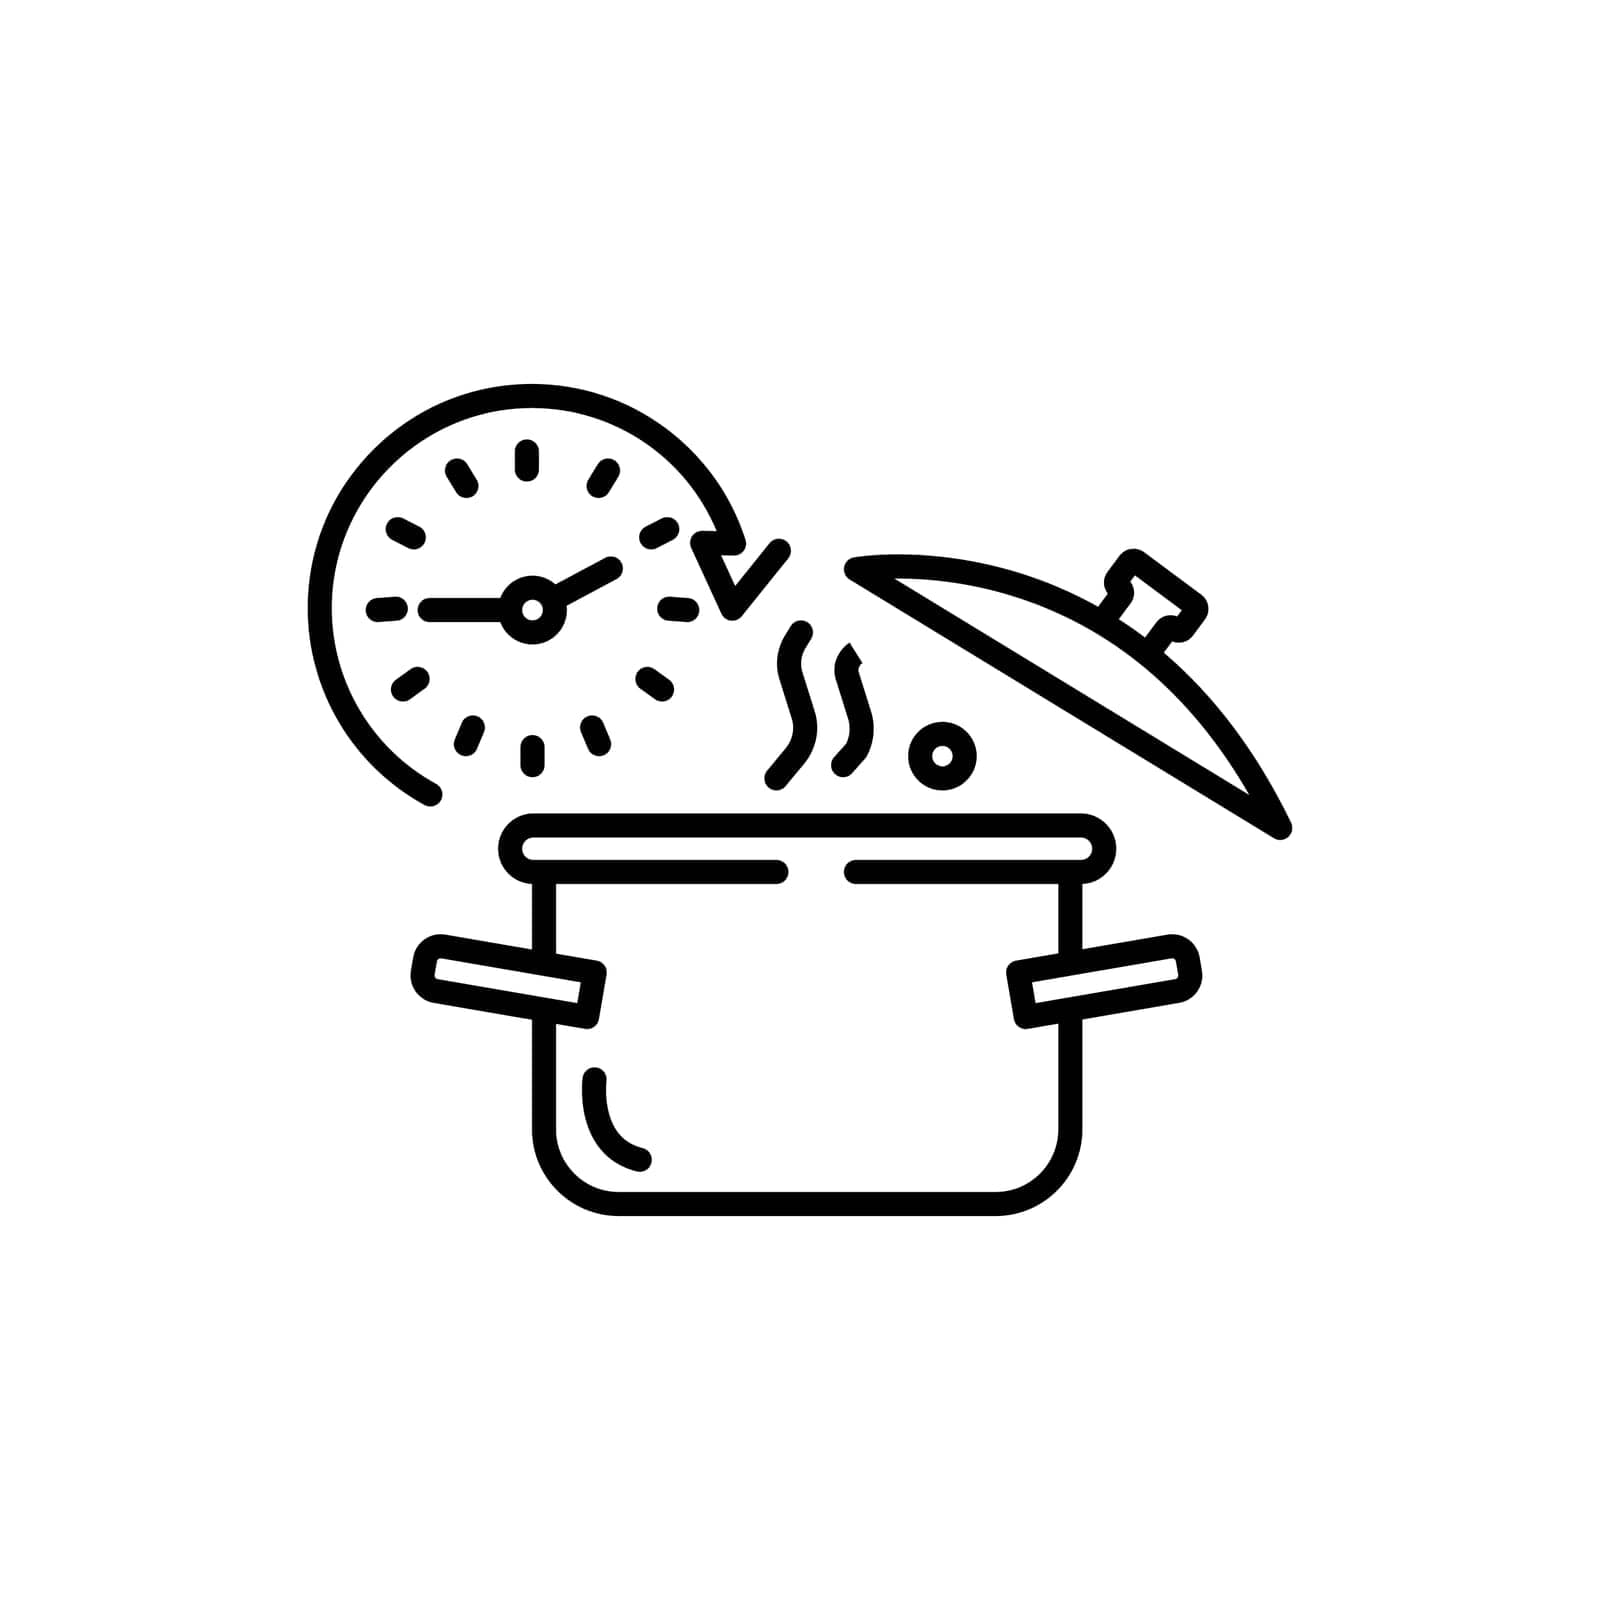 Cooking time icon, fast prepare meal, timer cook food, pan with clock, thin line web symbol on white background